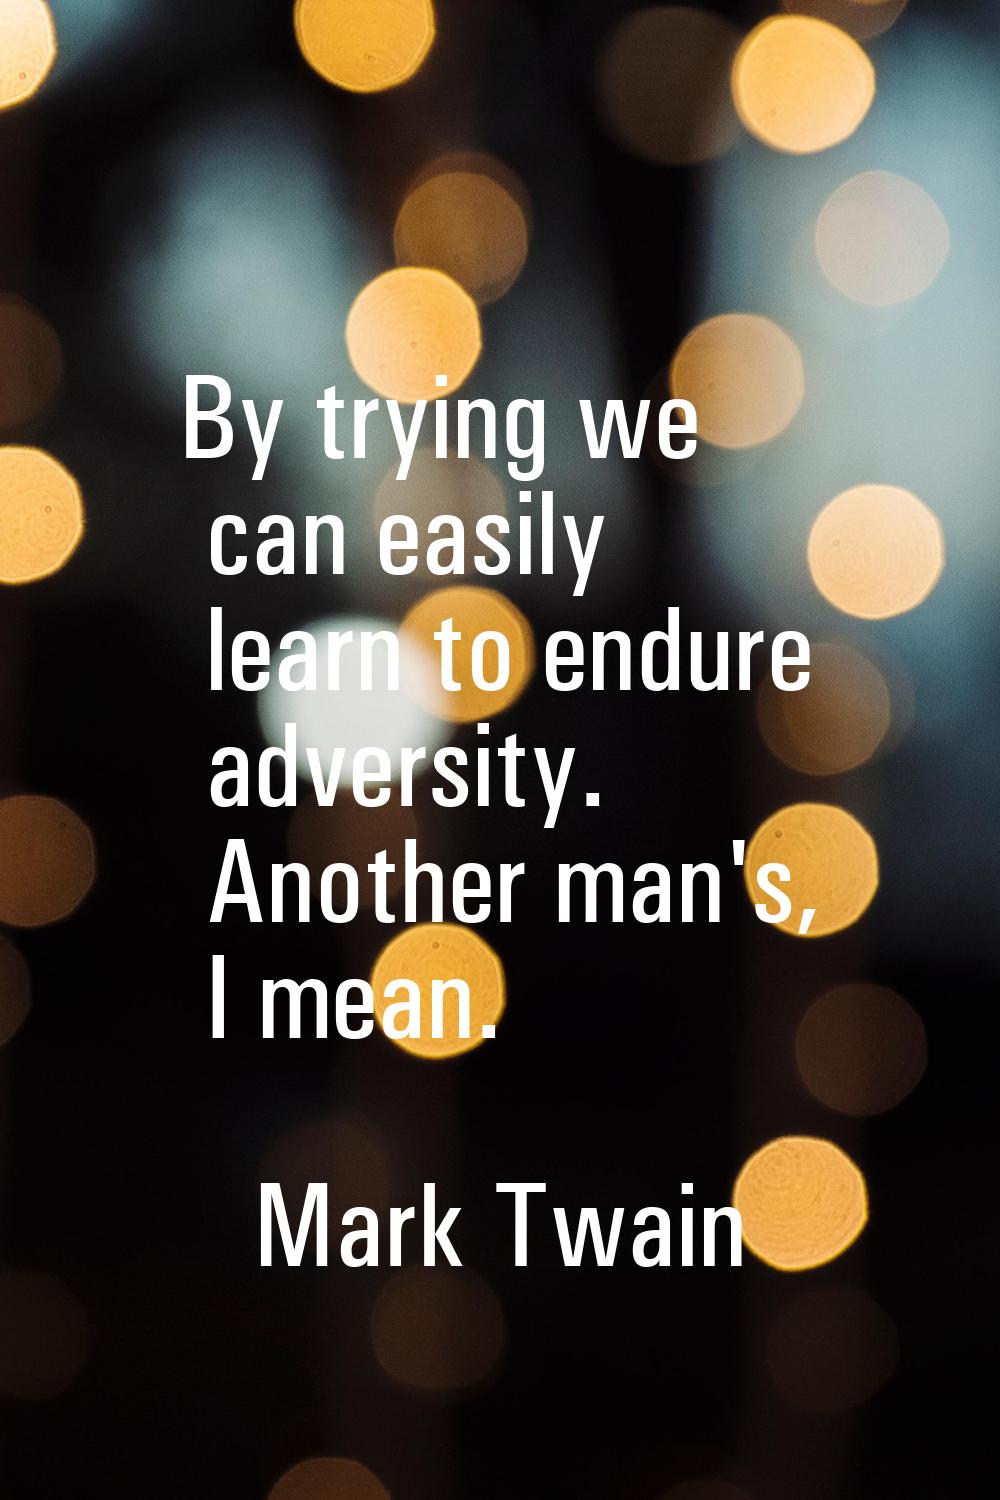 By trying we can easily learn to endure adversity. Another man's, I mean.